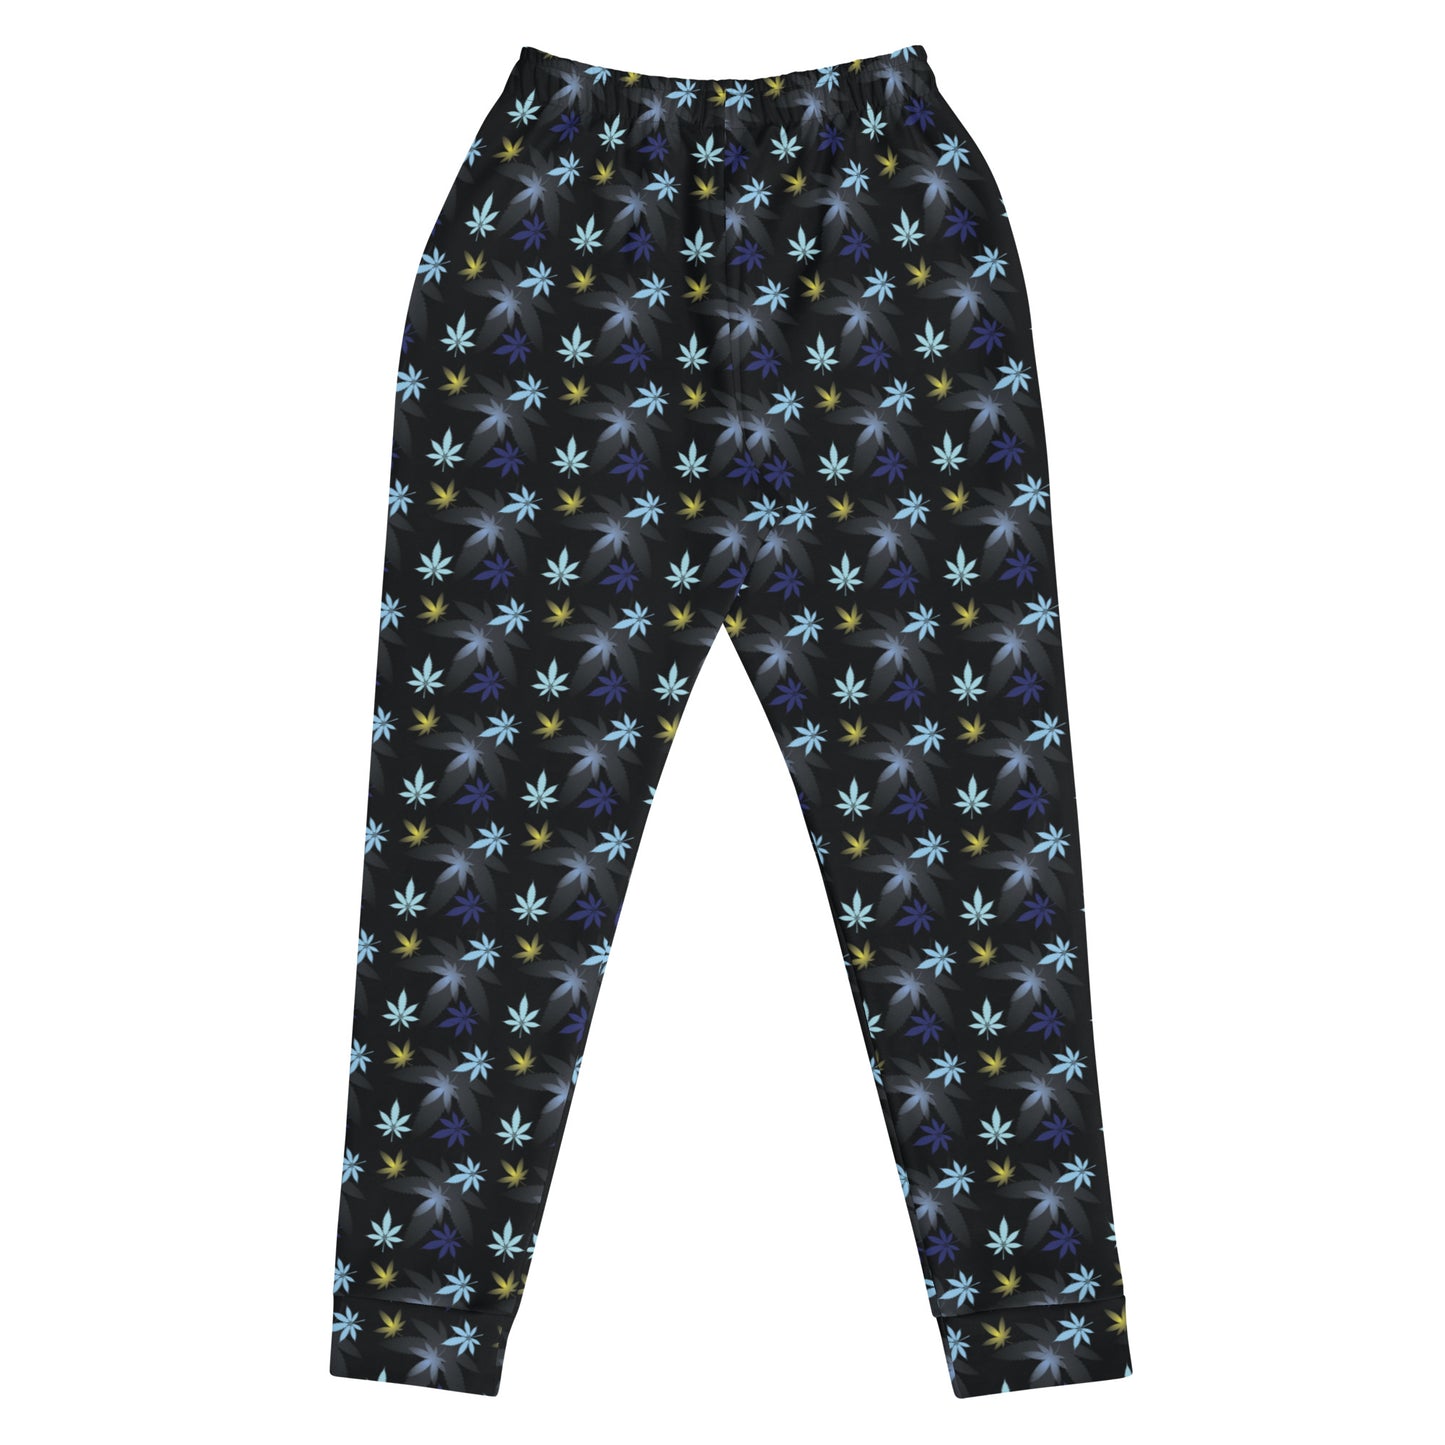 Chasing The Blues Women's Joggers